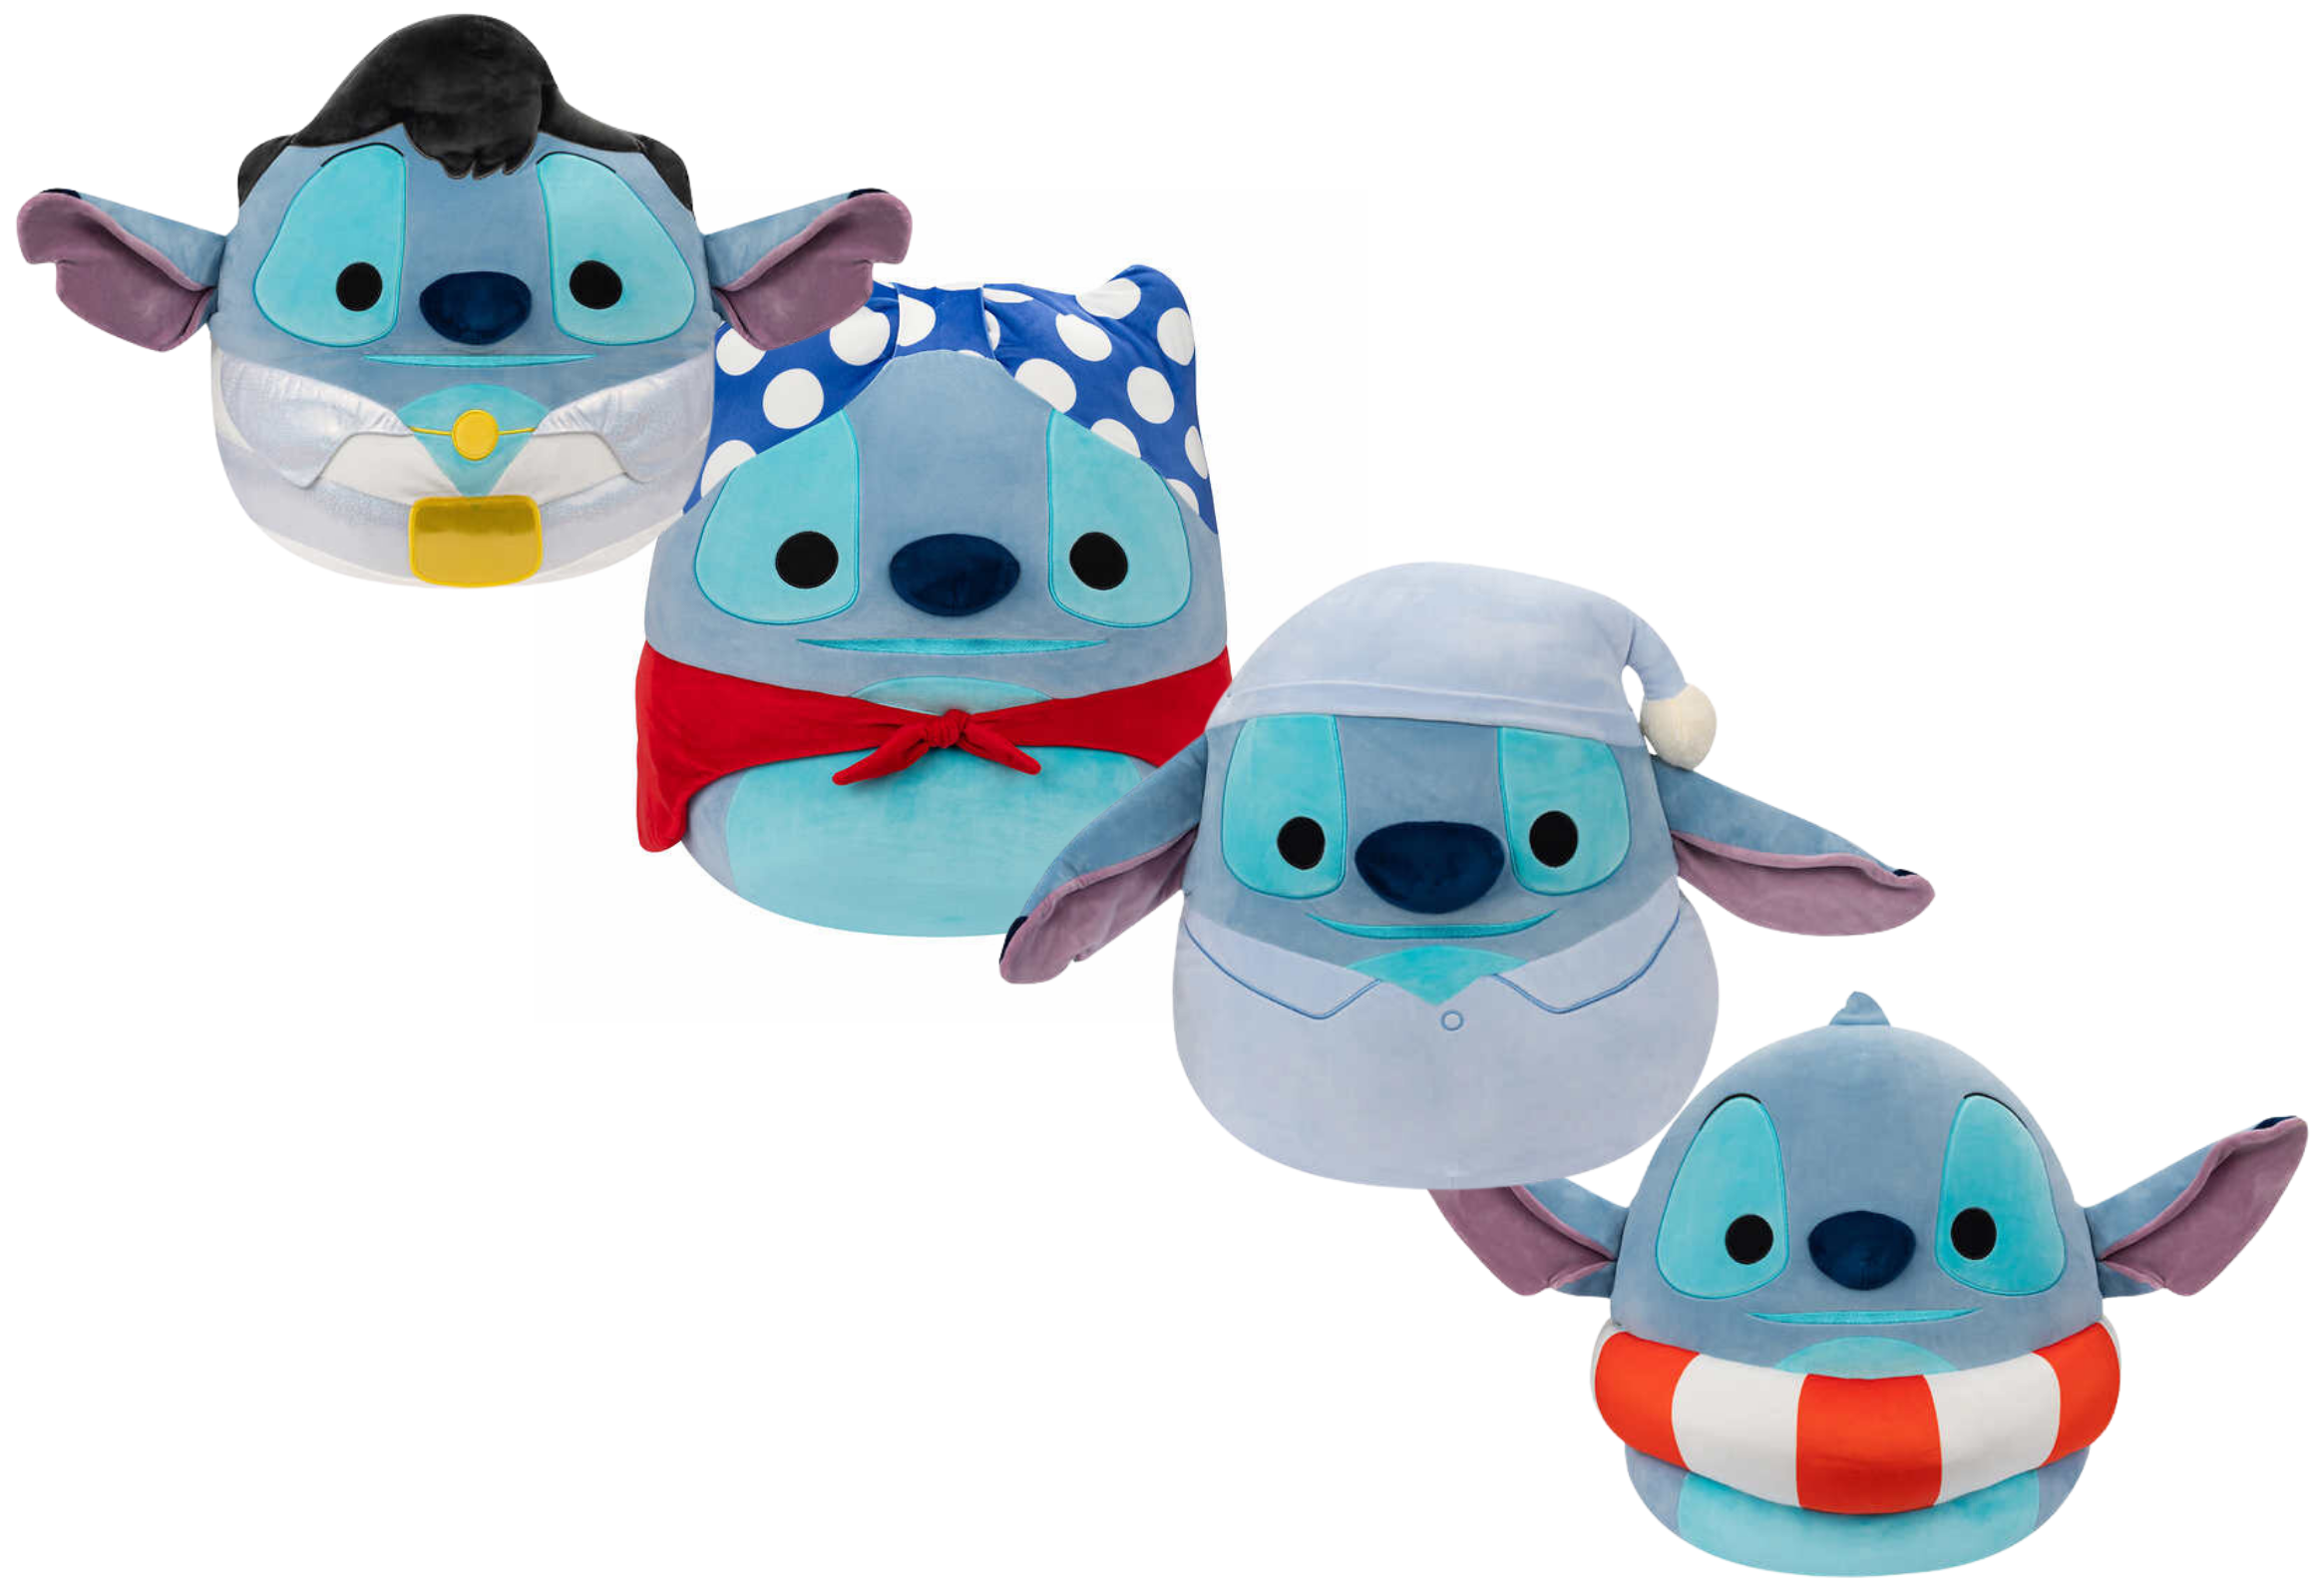 4 New Disney Stitch Squishmallows at Costco for the Holidays!